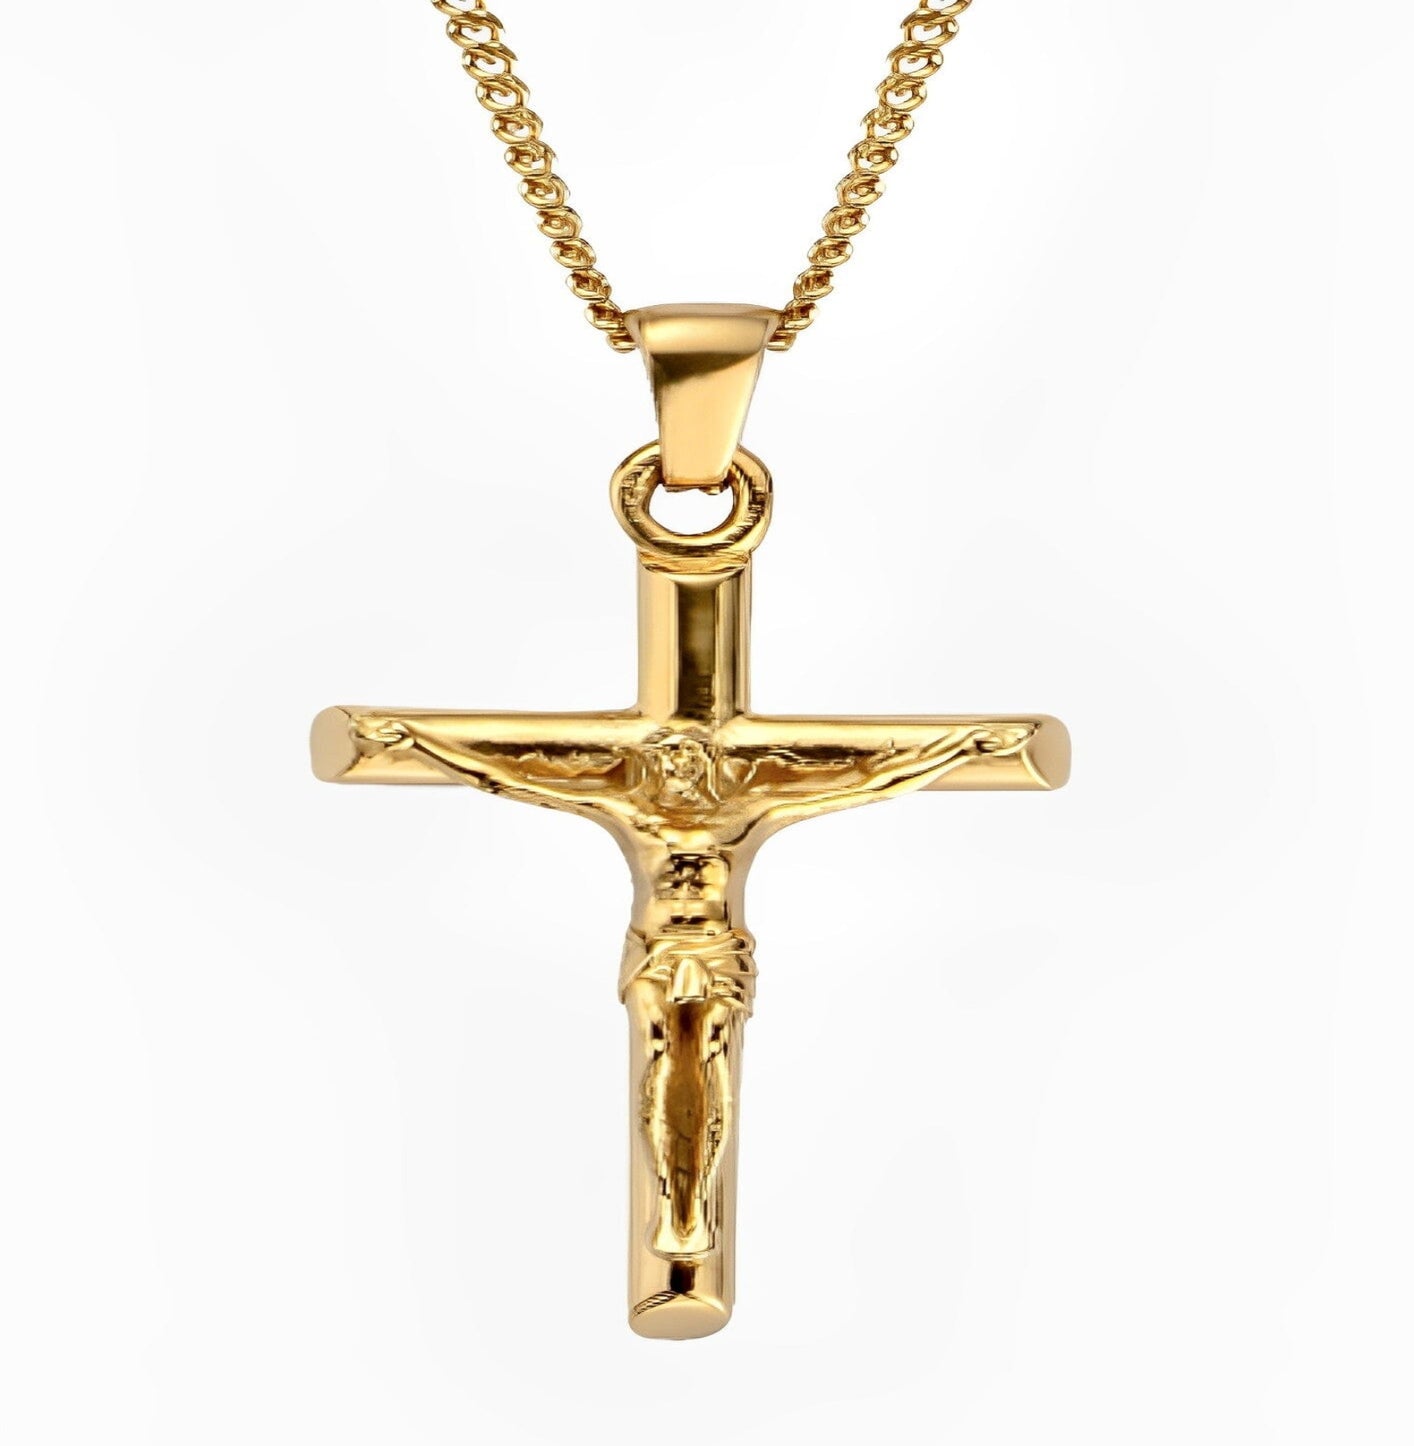 CHRISTIAN NECKLACE neck Yubama Jewelry Online Store - The Elegant Designs of Gold and Silver ! 